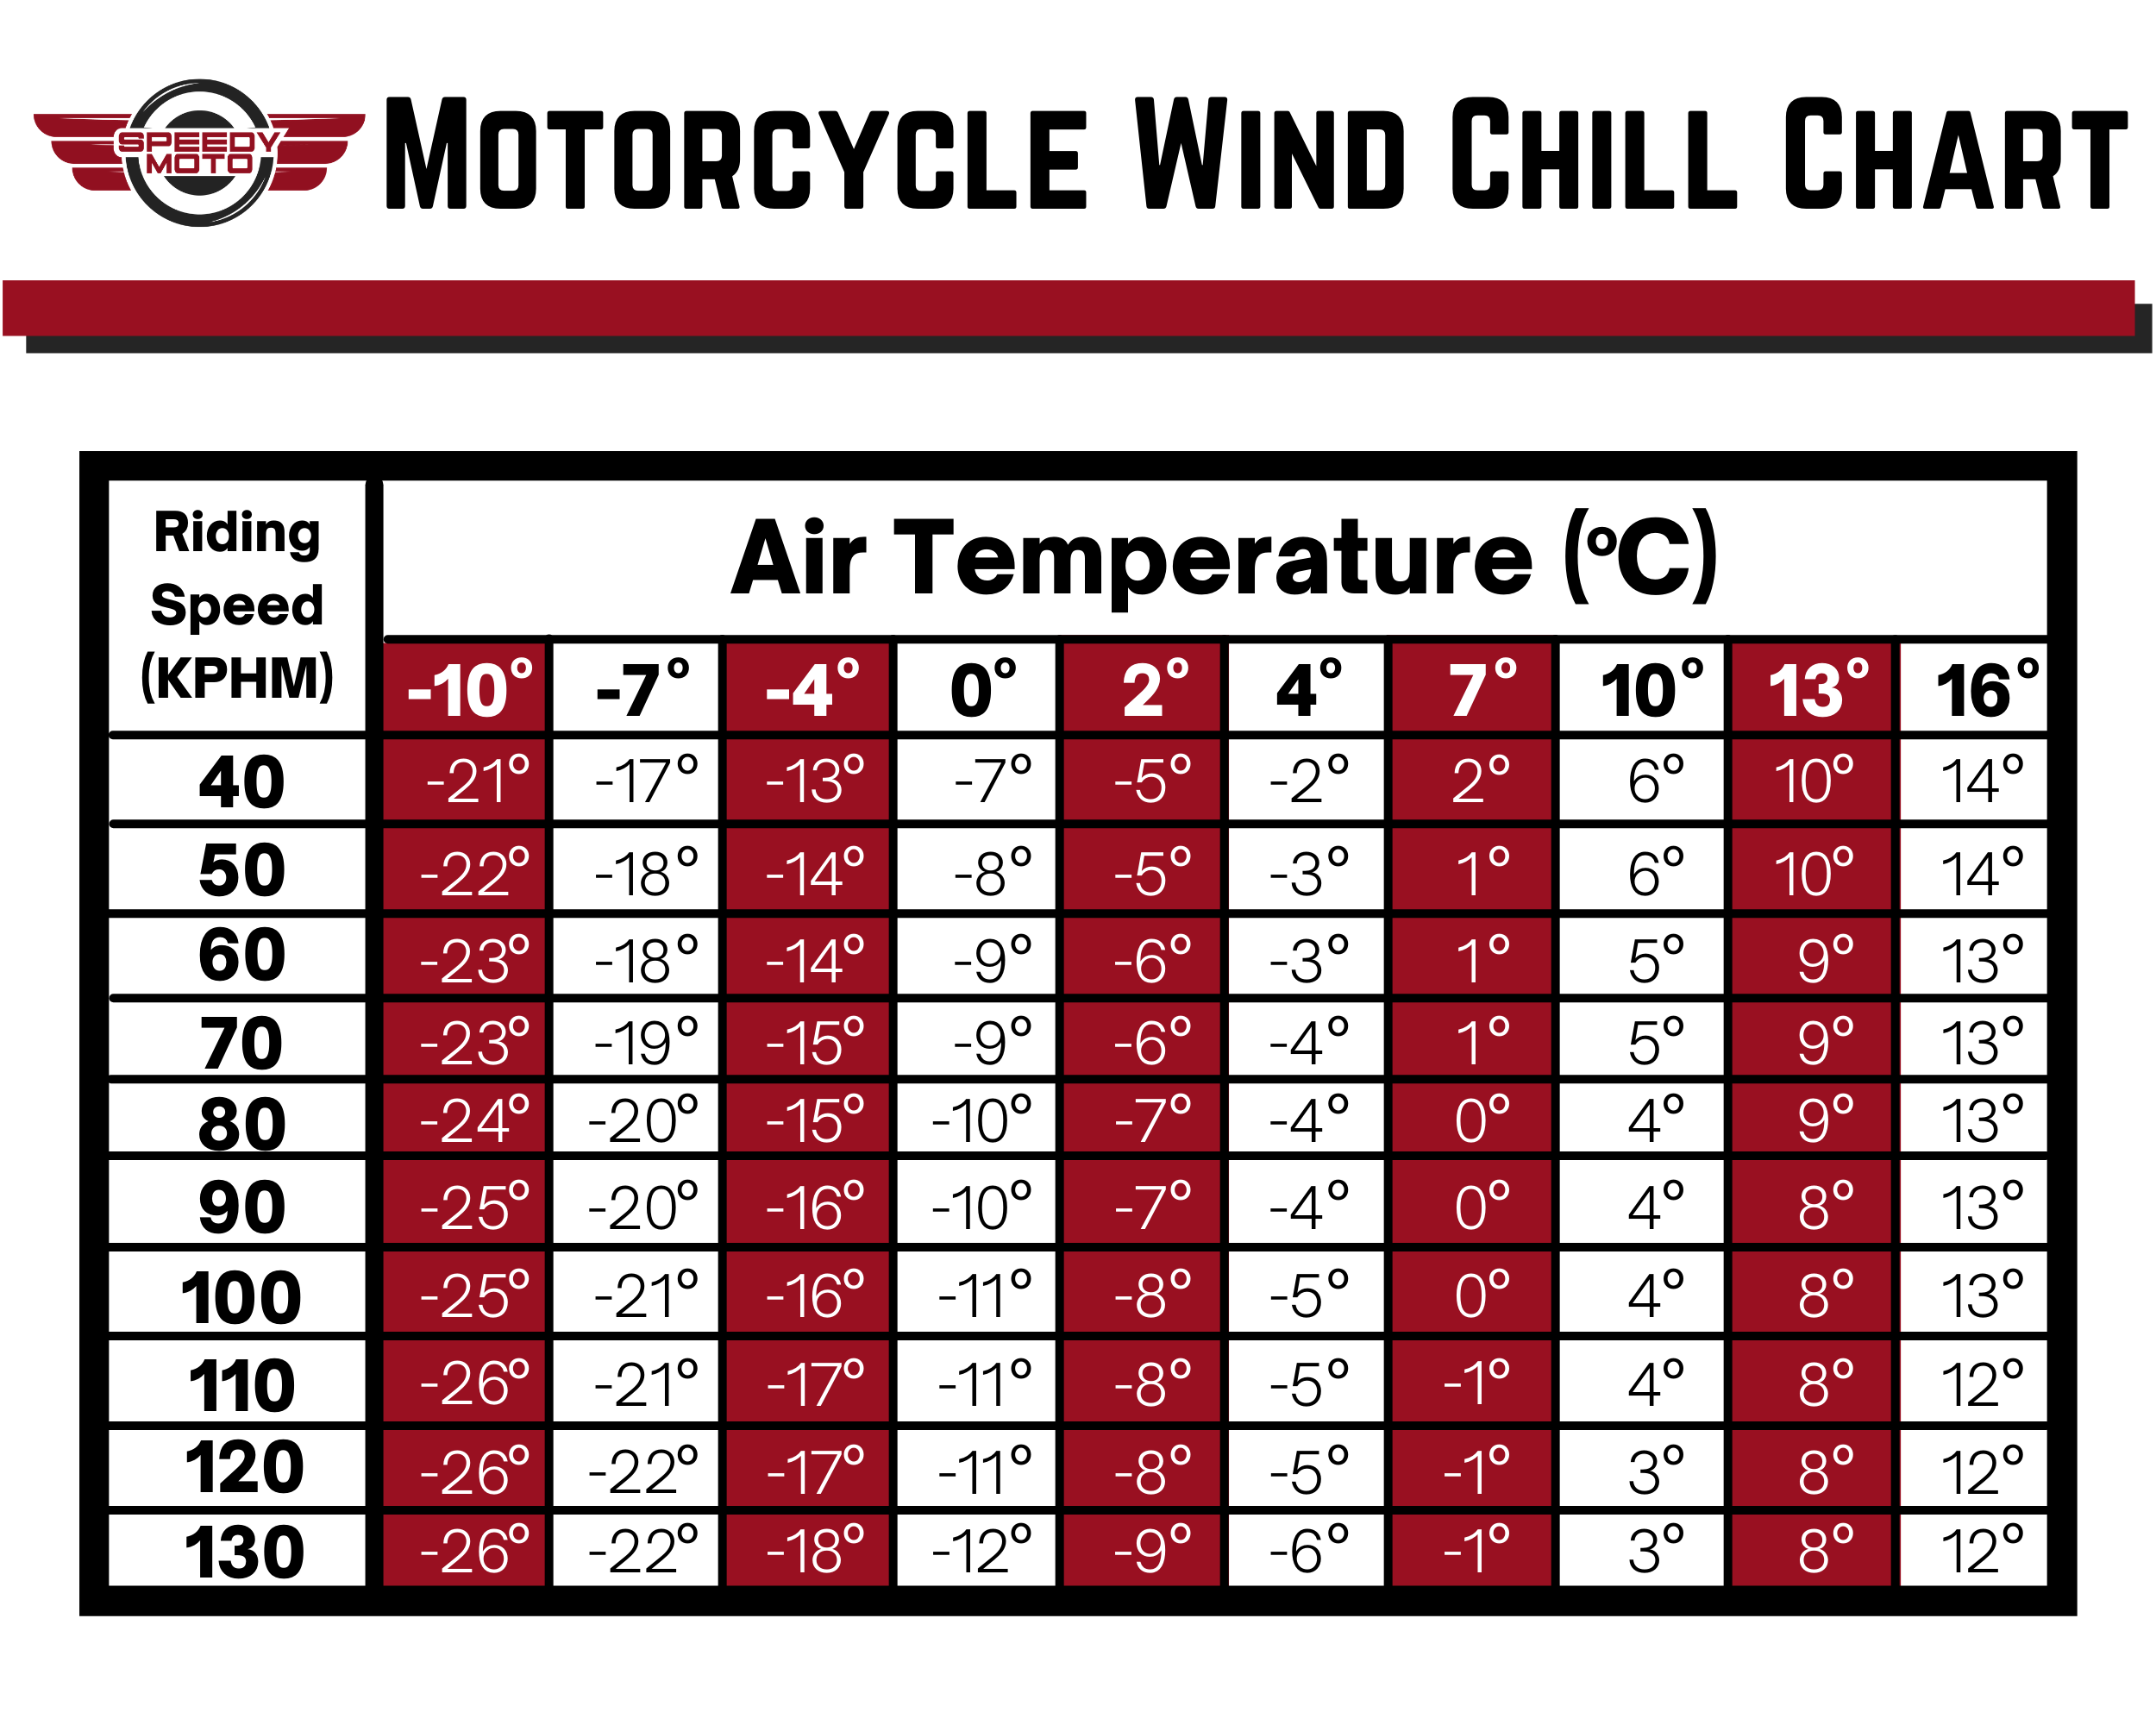 wind chill chart for motorcycle riding